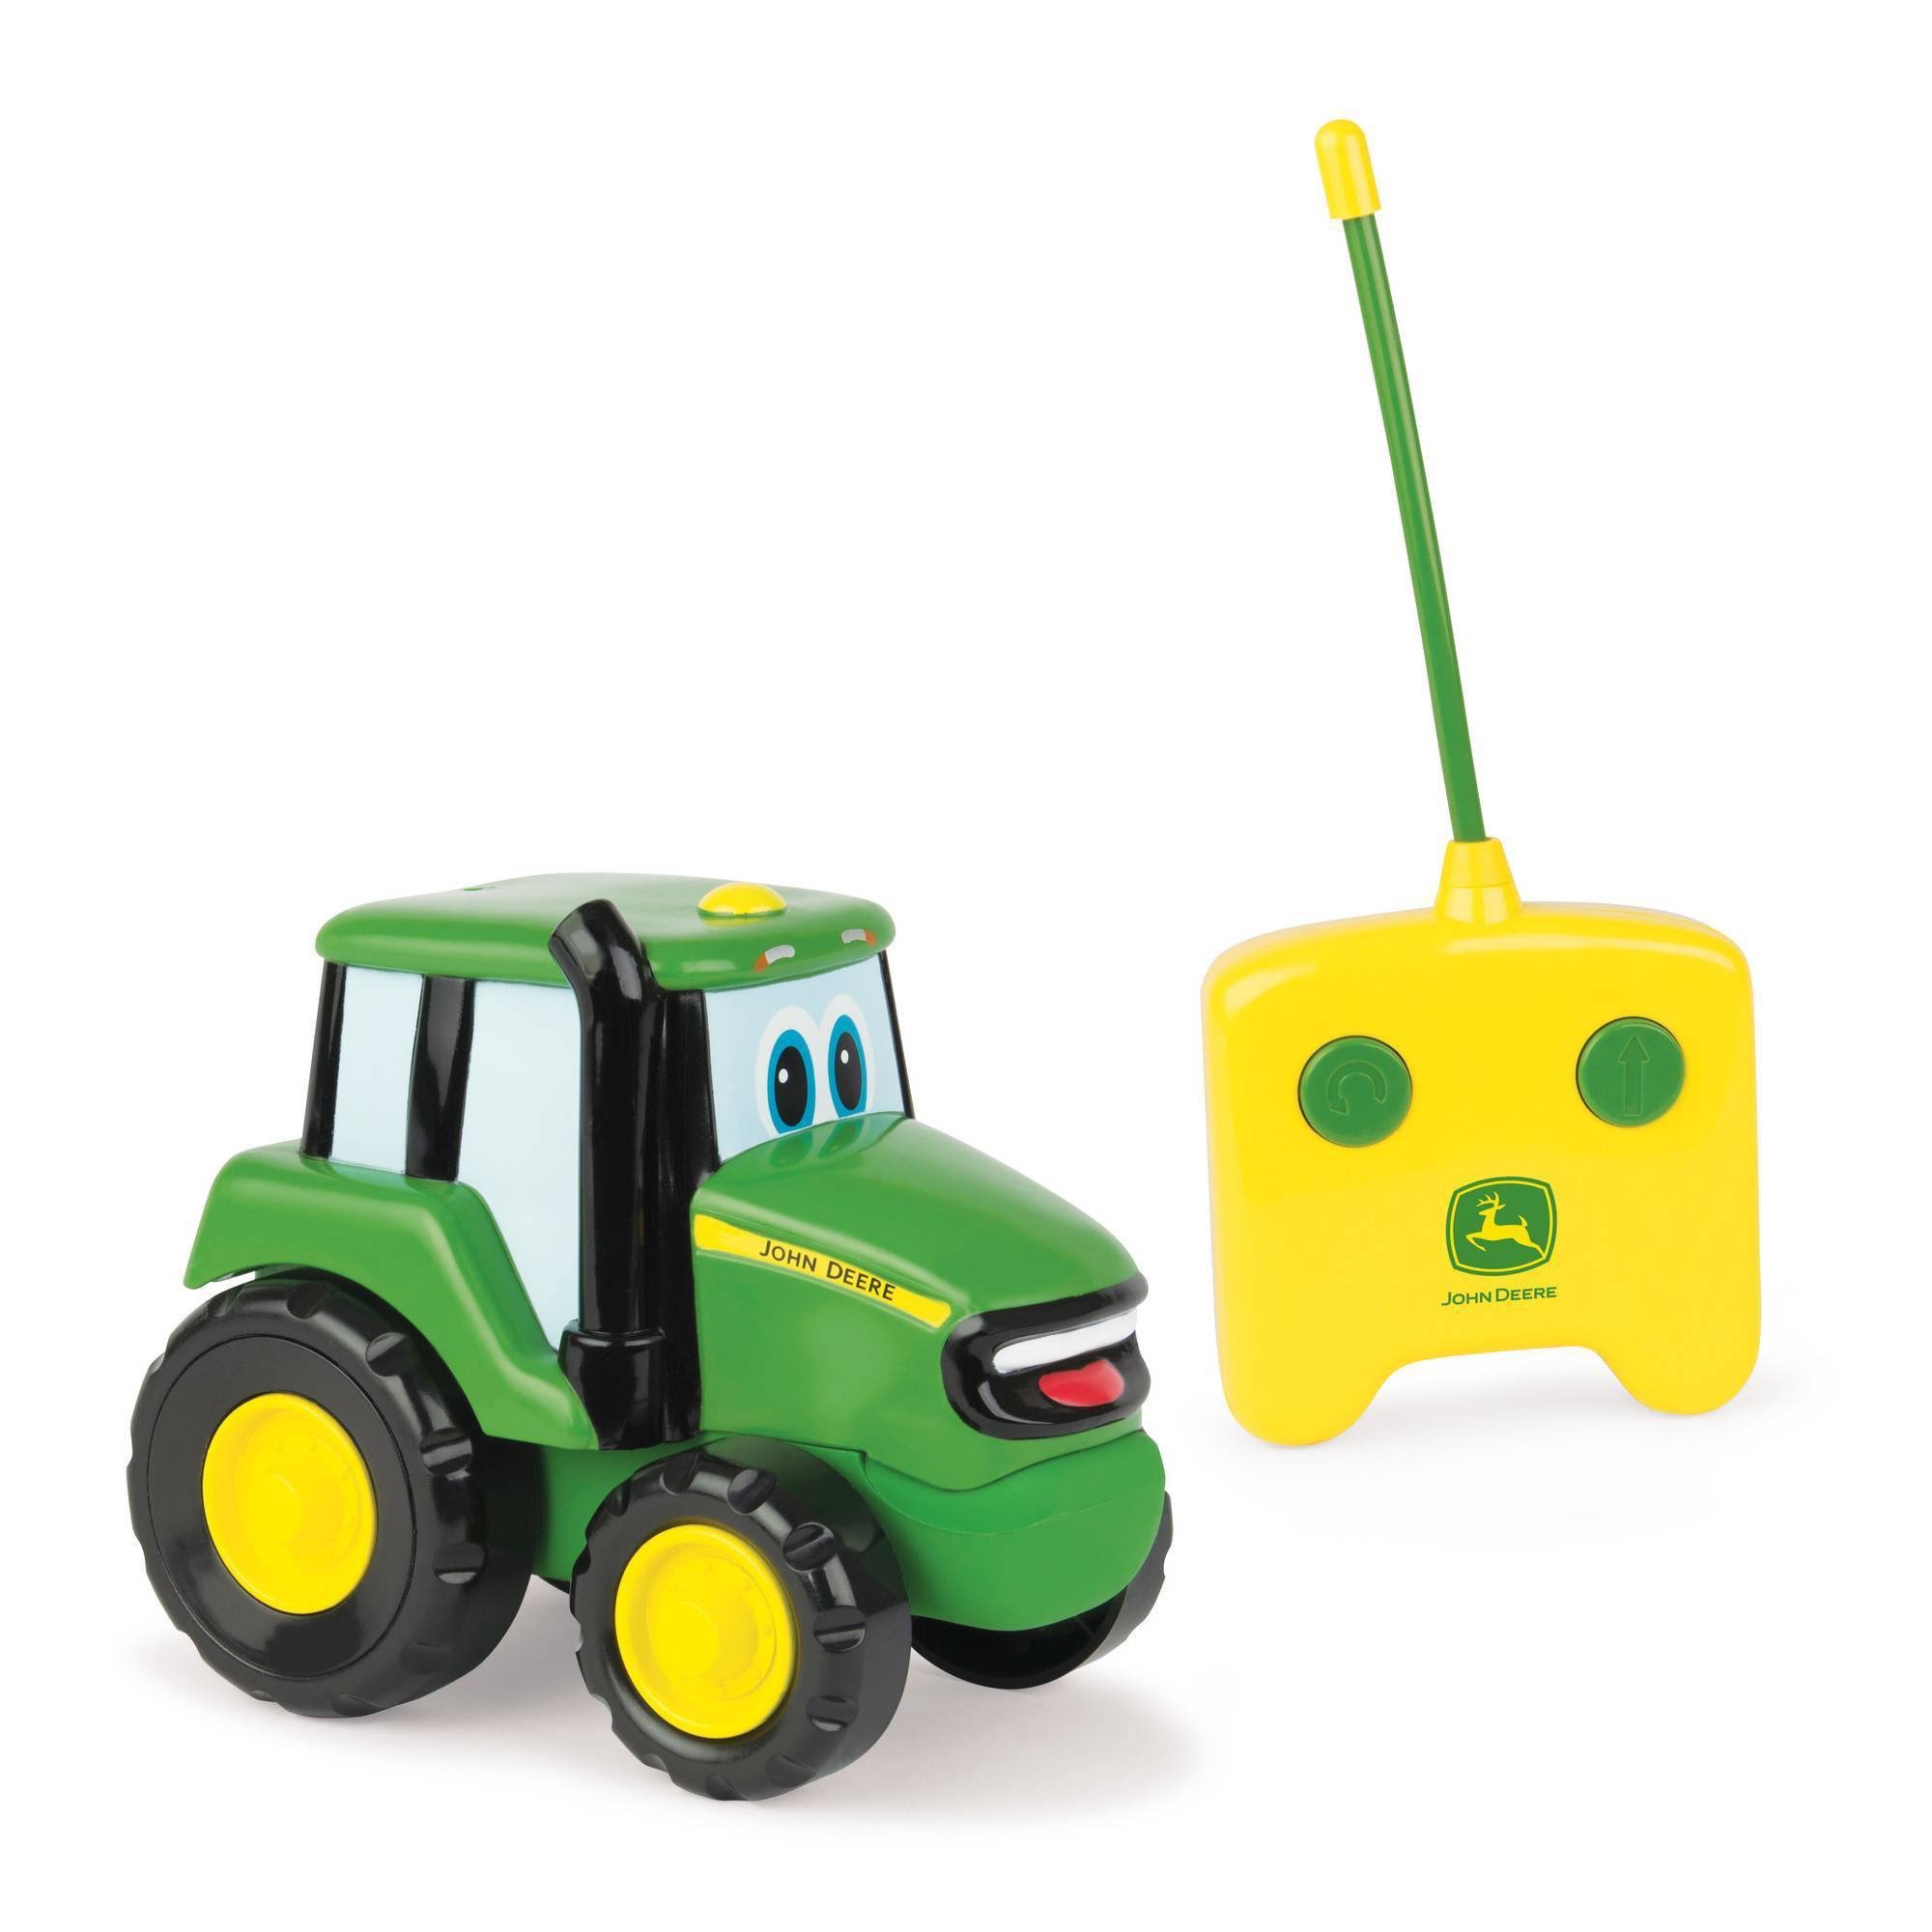 John Deere Remote Controlled Johnny Tractor Toy